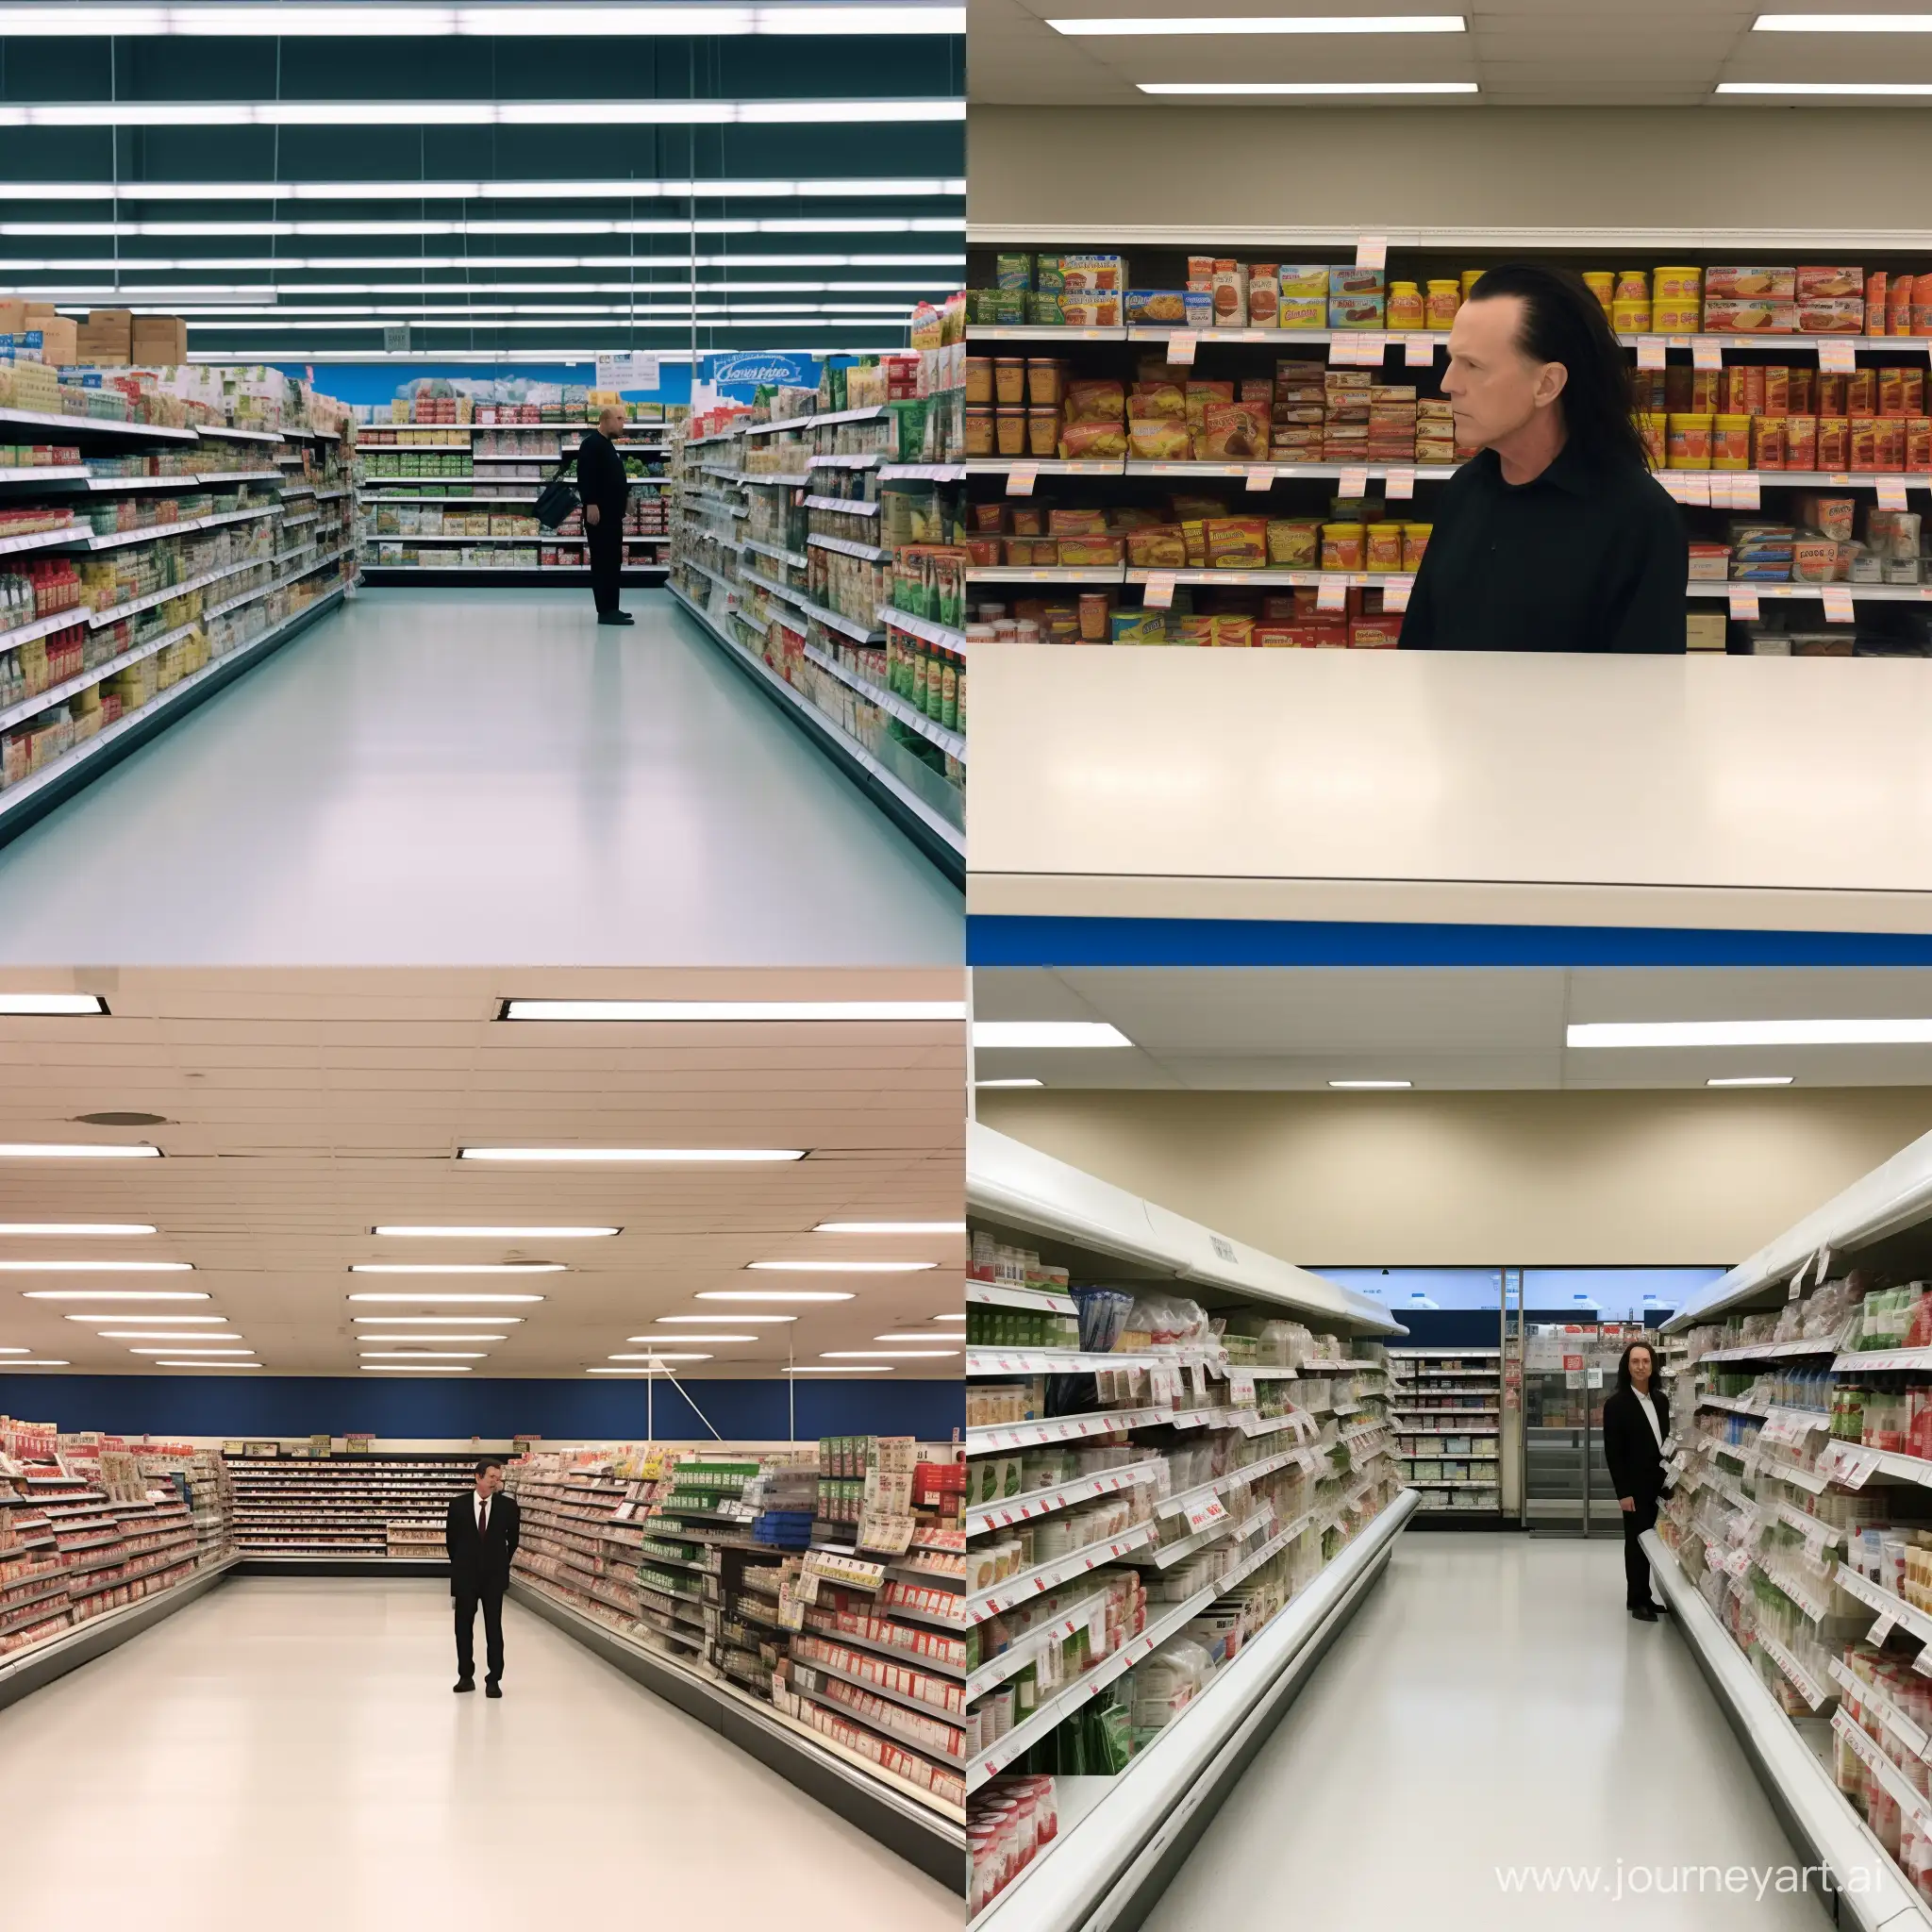 Playboi-Carti-Leading-a-Stylish-Gathering-in-a-Grocery-Store